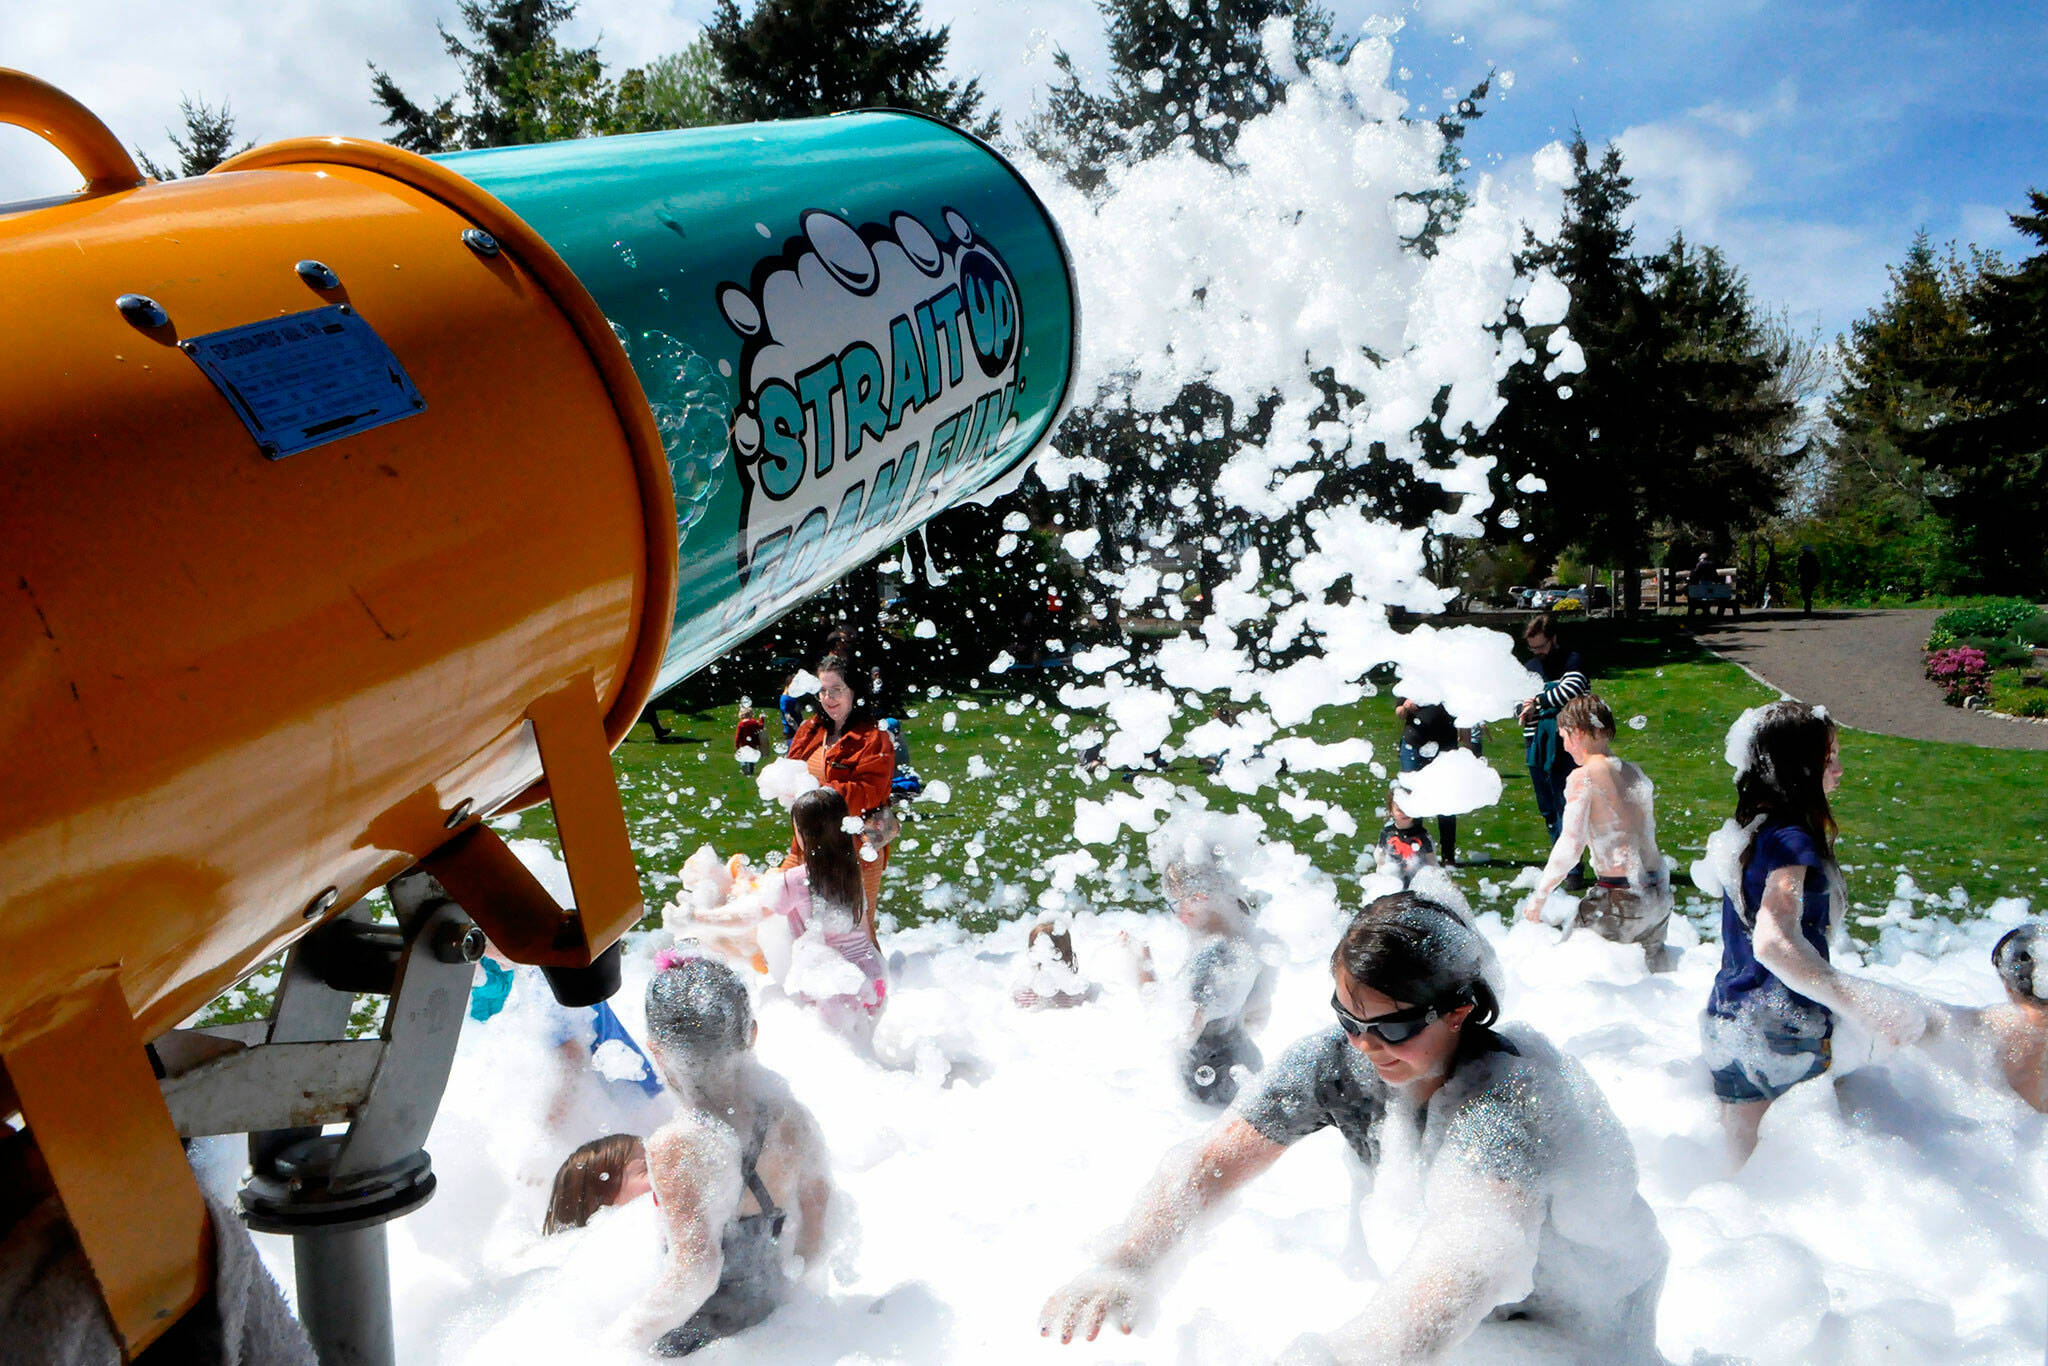 Matthew Nash/Olympic Peninsula News Group
Strait Up Foam Fun, seen in 2023, returns to Carrie Blake Community Park on Sunday for Family Fun Days so children can play in the eco-friendly, biodegradable foam.